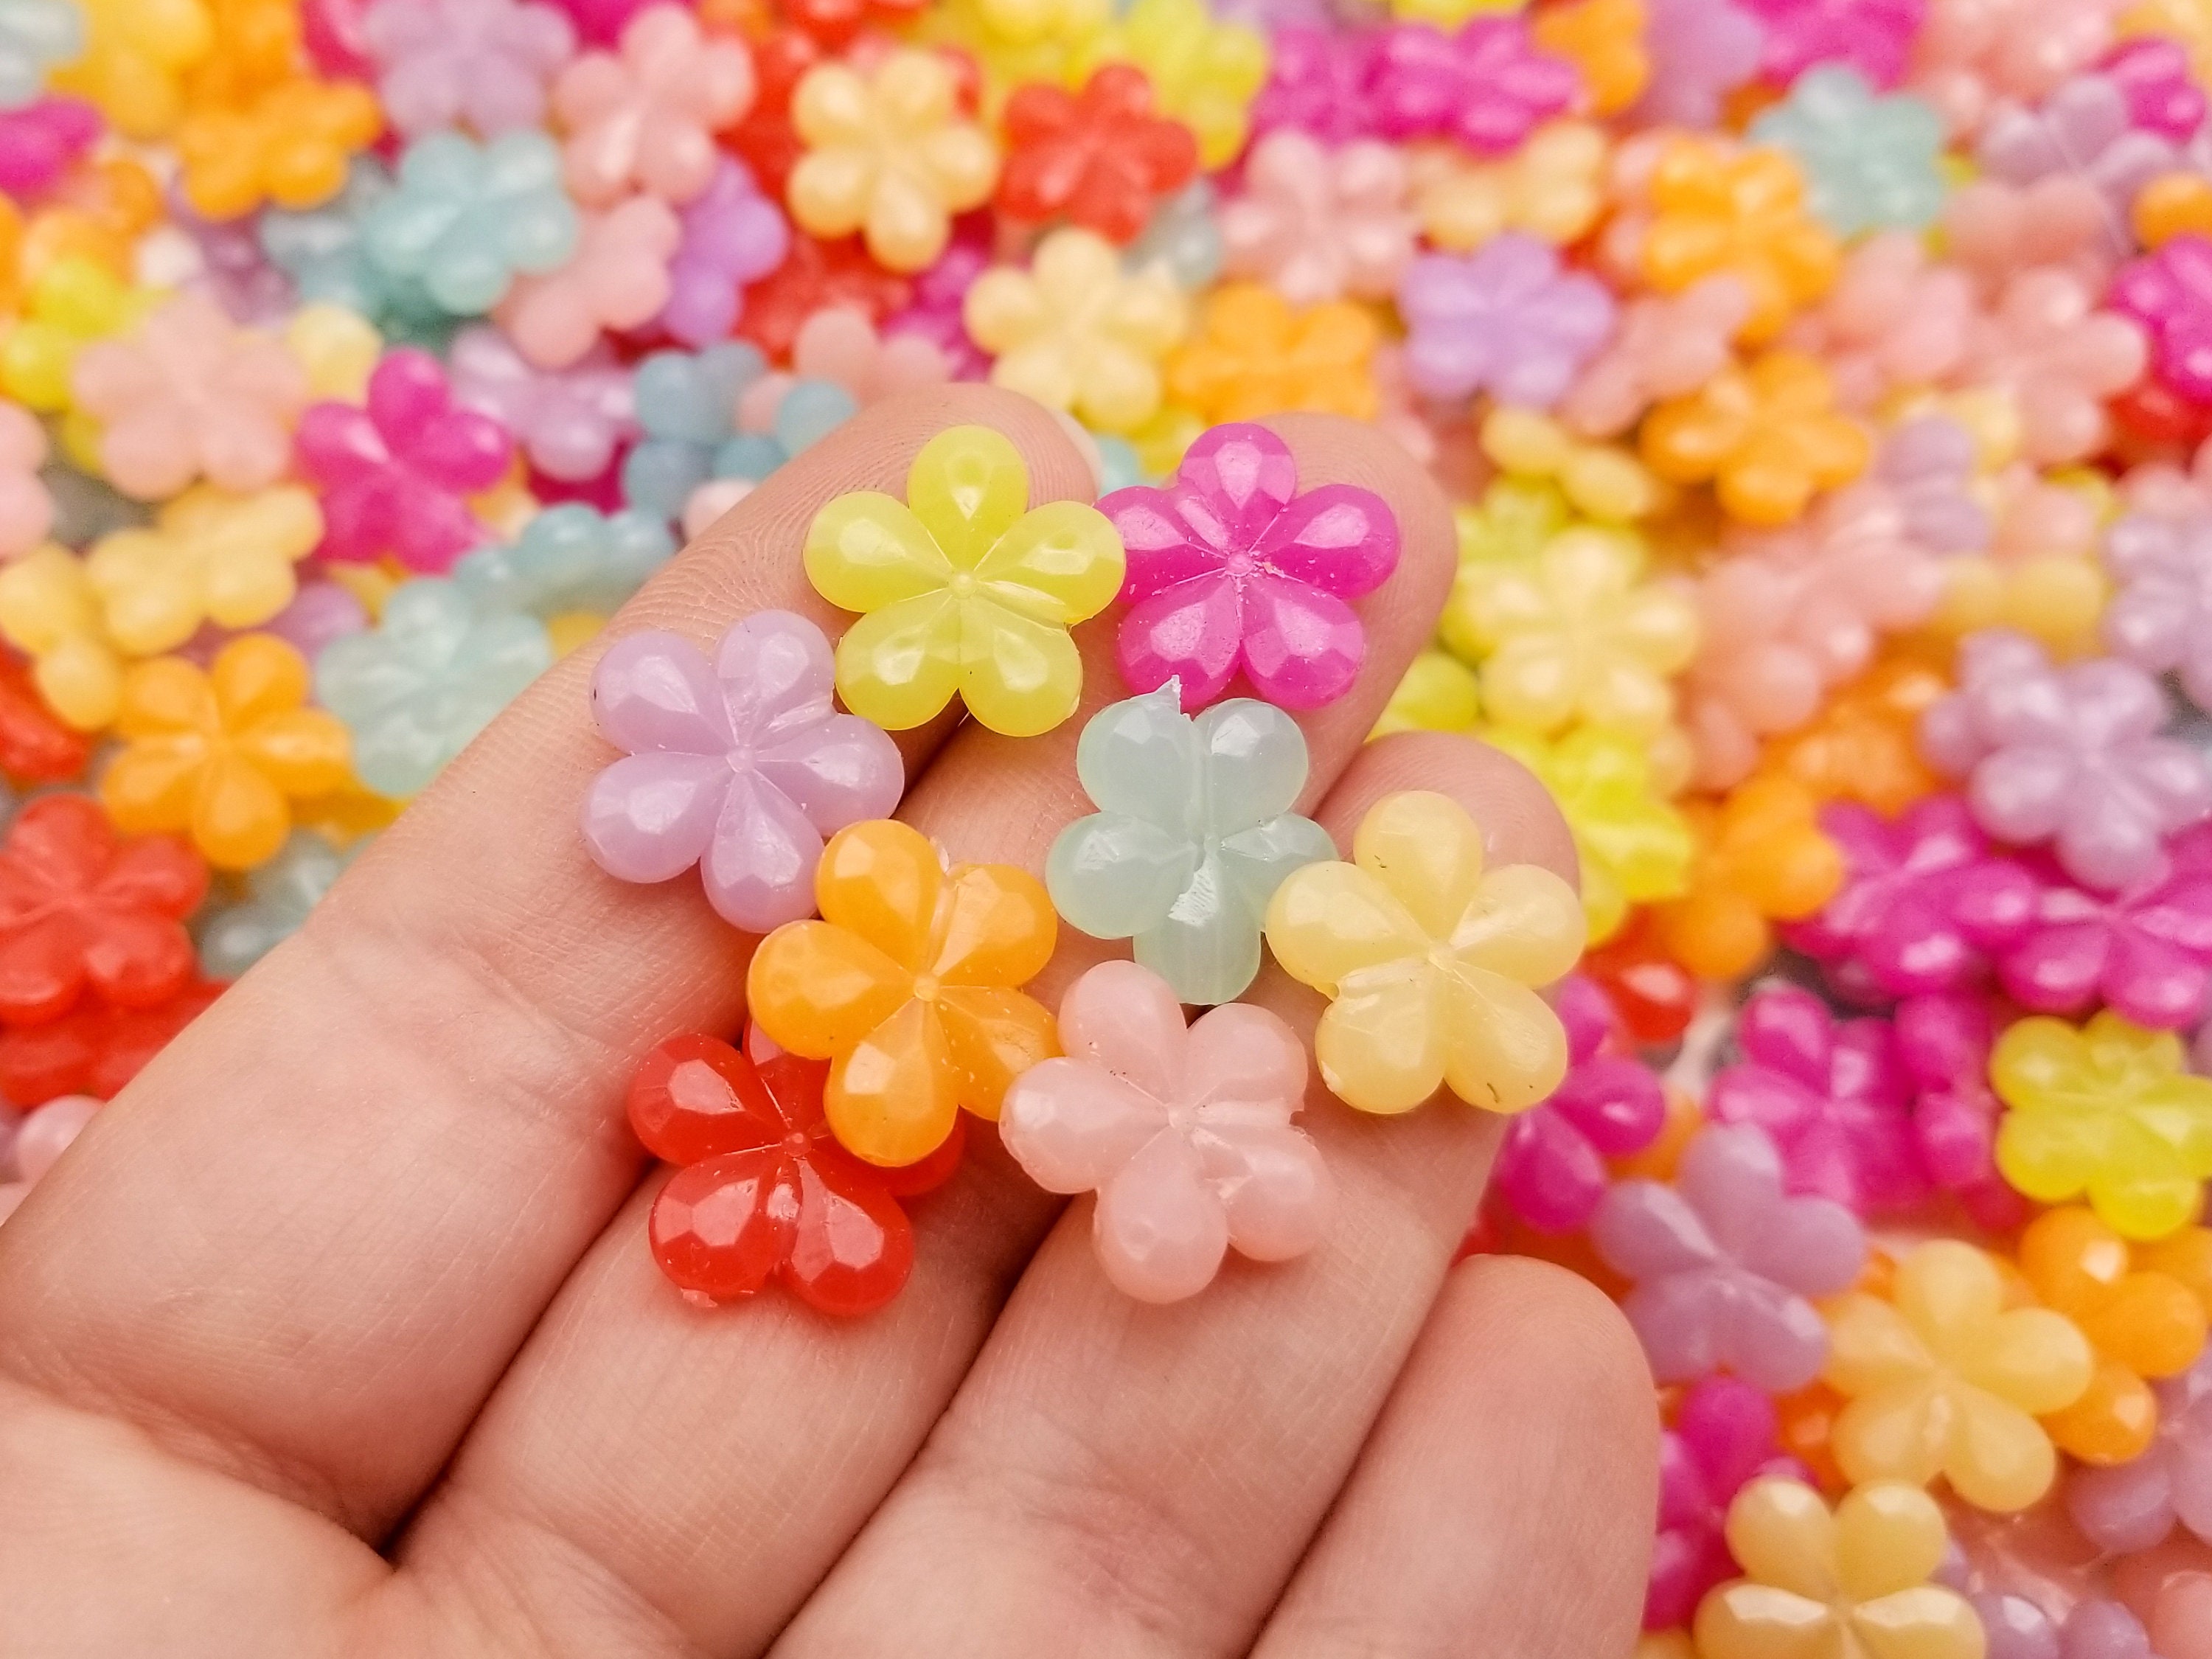 Kawaii Pearl Assortment in Various Shapes and Sizes, Pearlised Flower, MiniatureSweet, Kawaii Resin Crafts, Decoden Cabochons Supplies